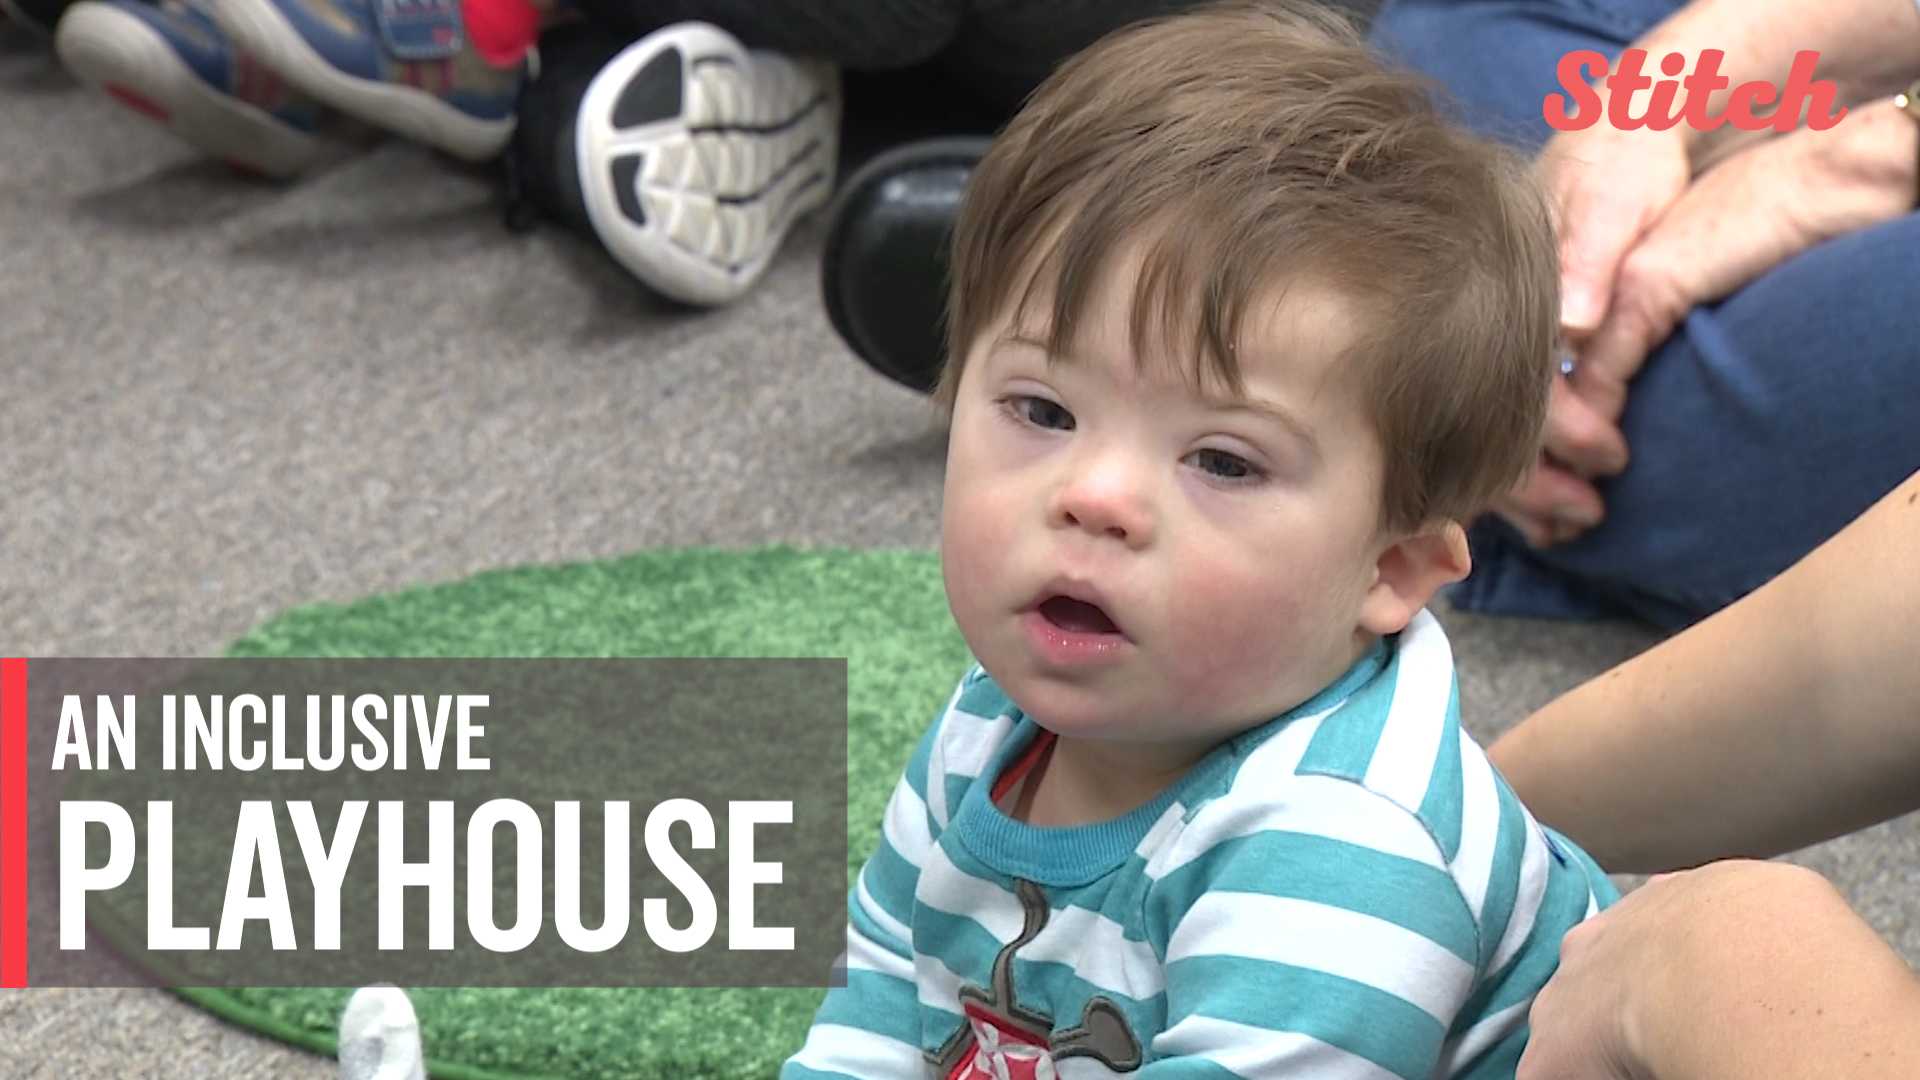 GiGi's Playhouse provides an inclusive experience for children with Down syndrome